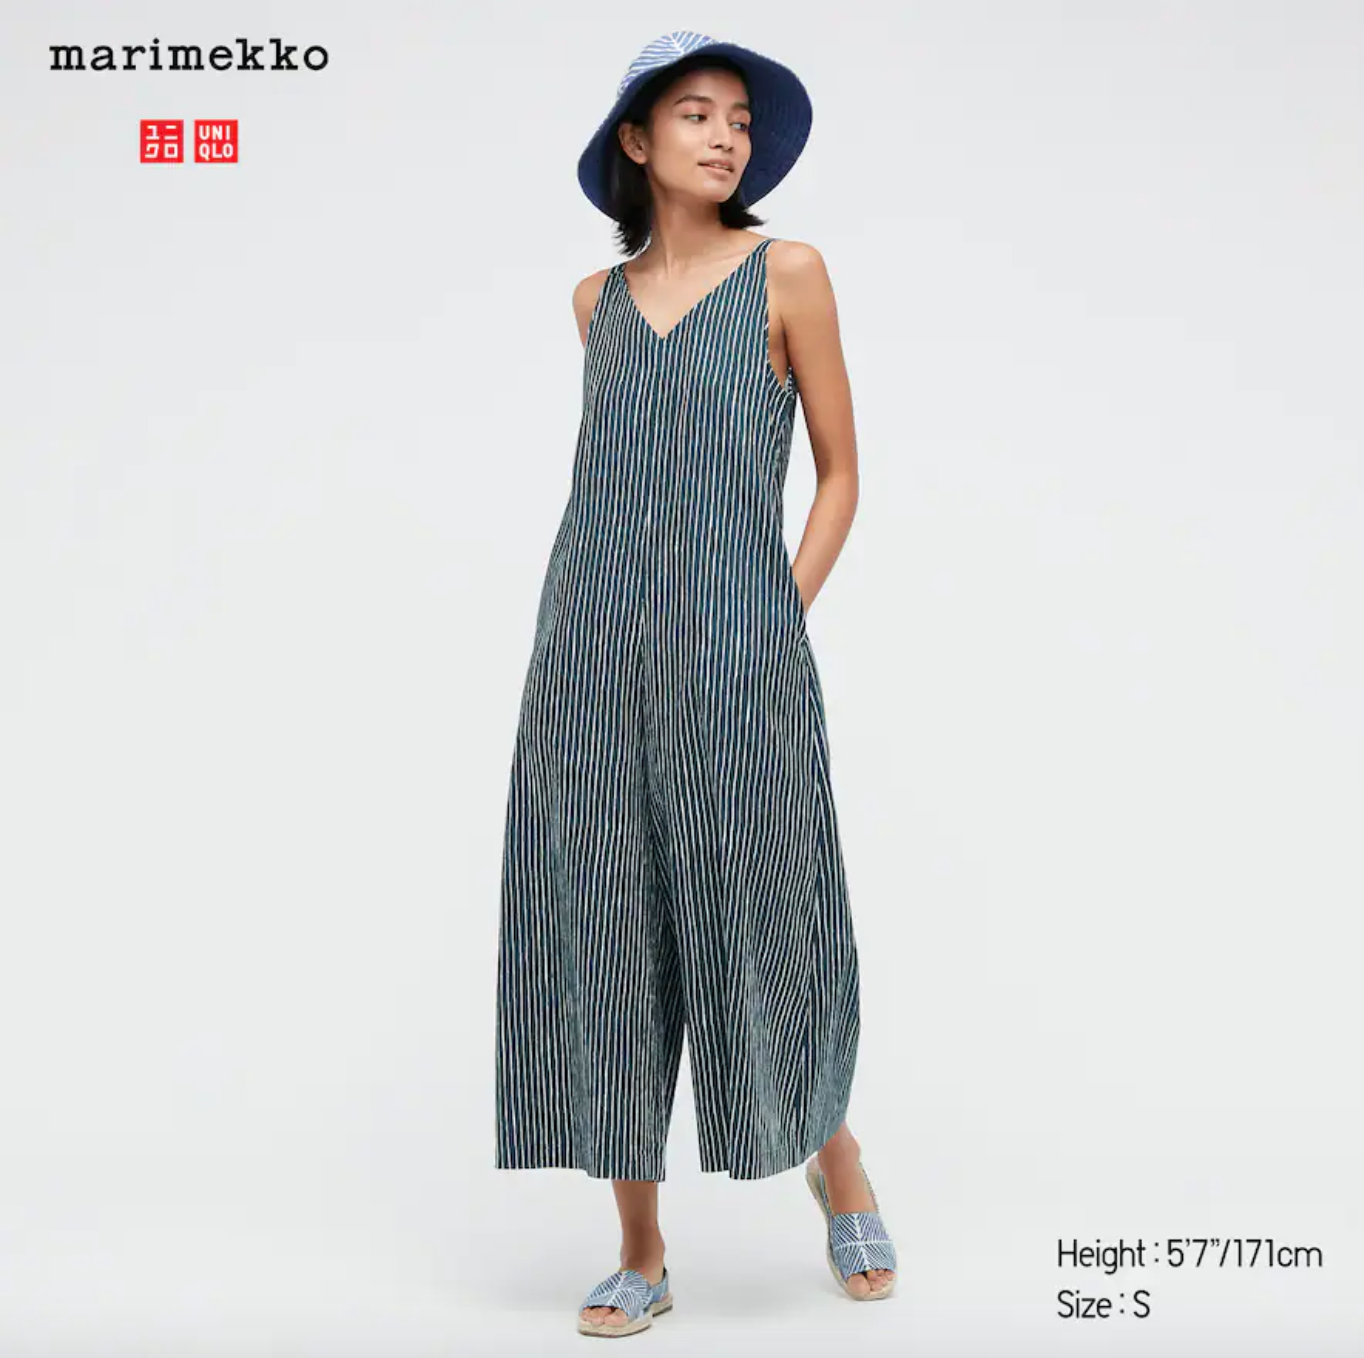 Uniqlo launches springsummer 2023 collection with Mame Kurogouchi